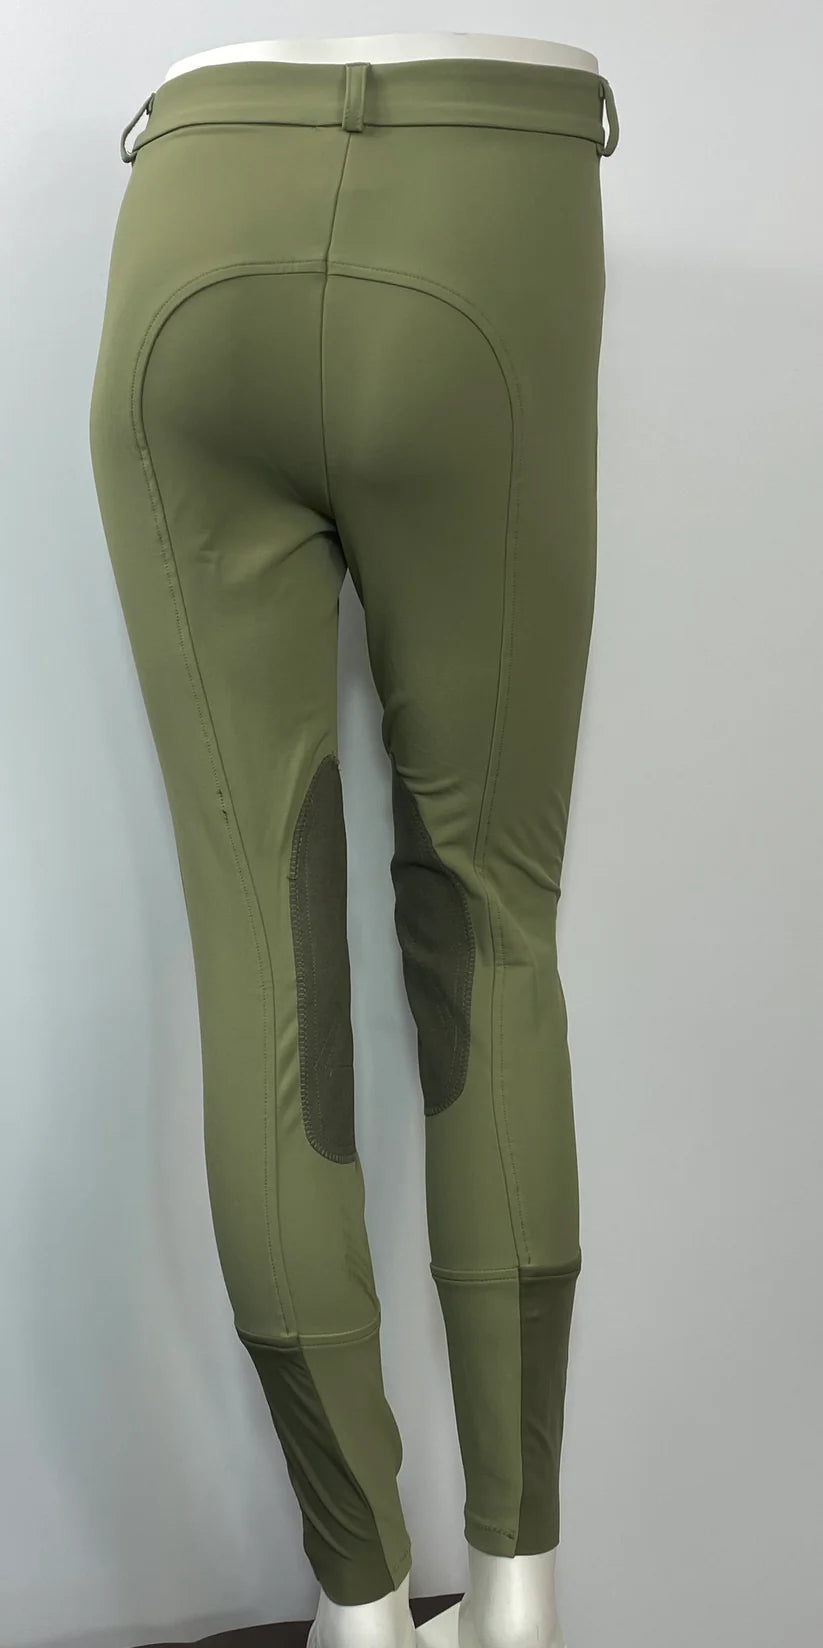 Huntress Riding Apparel Green Beige Breeches *LIMITED EDITION*